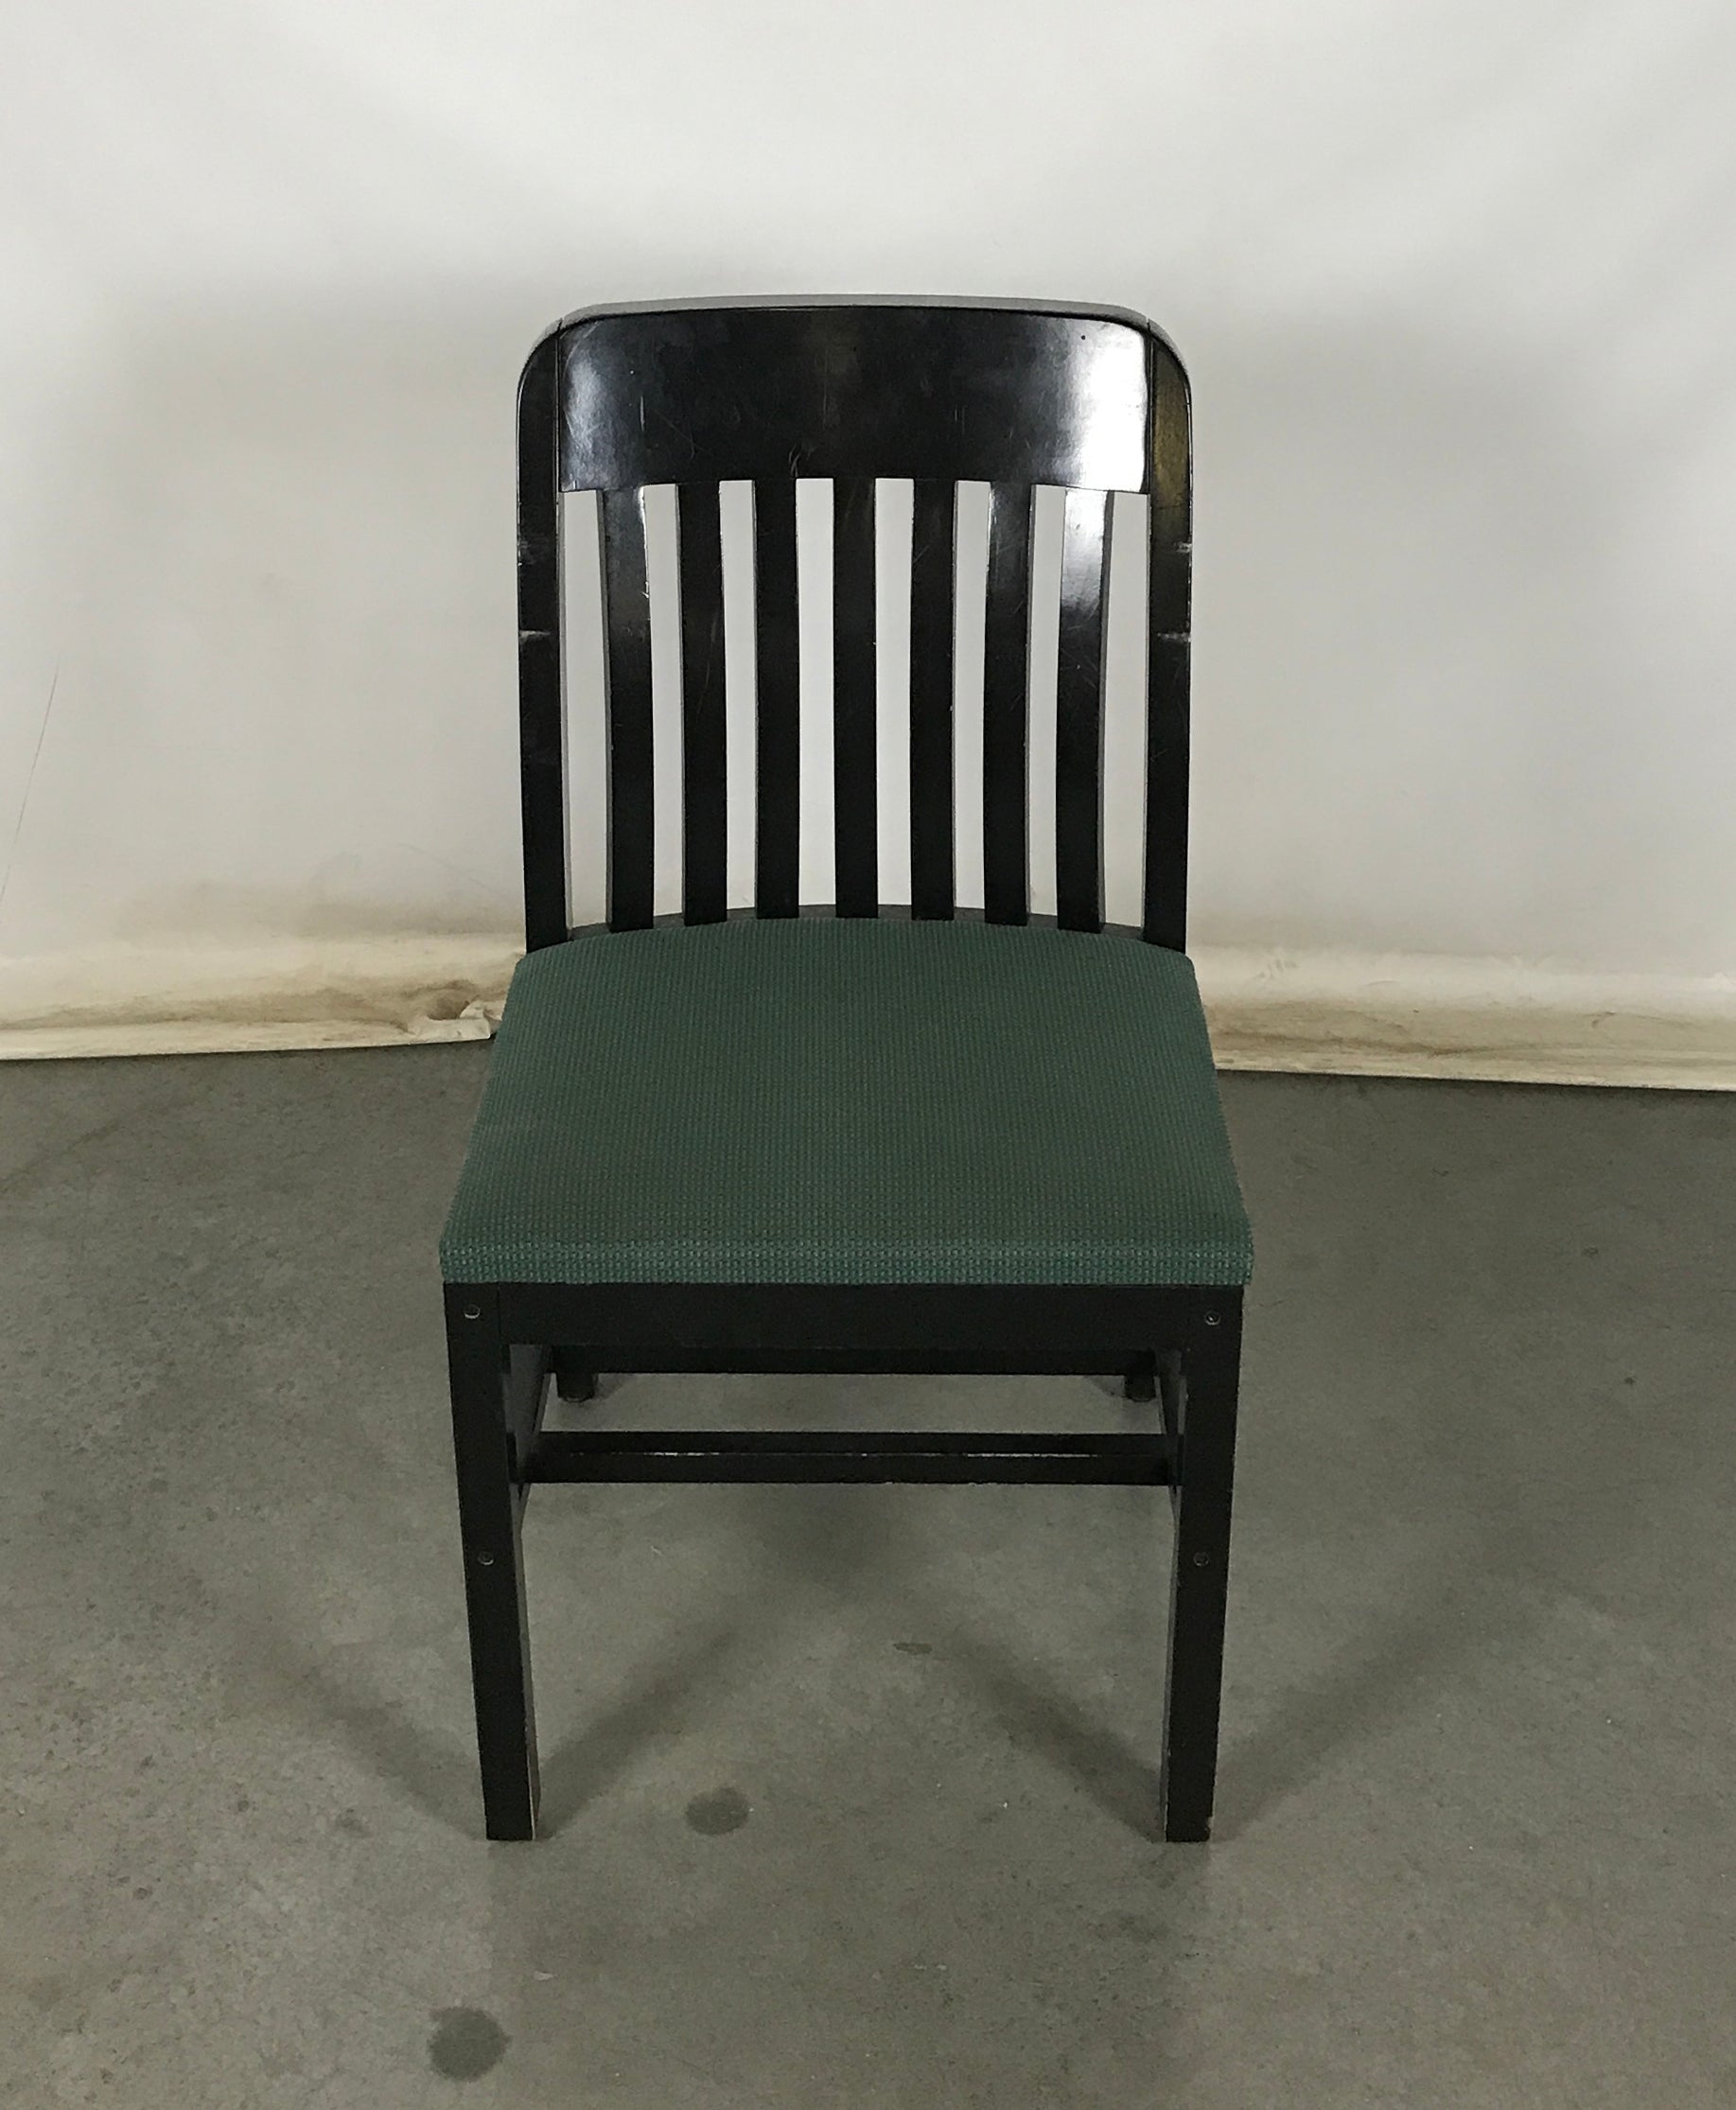 Academy Black and Green Upholstered Chair